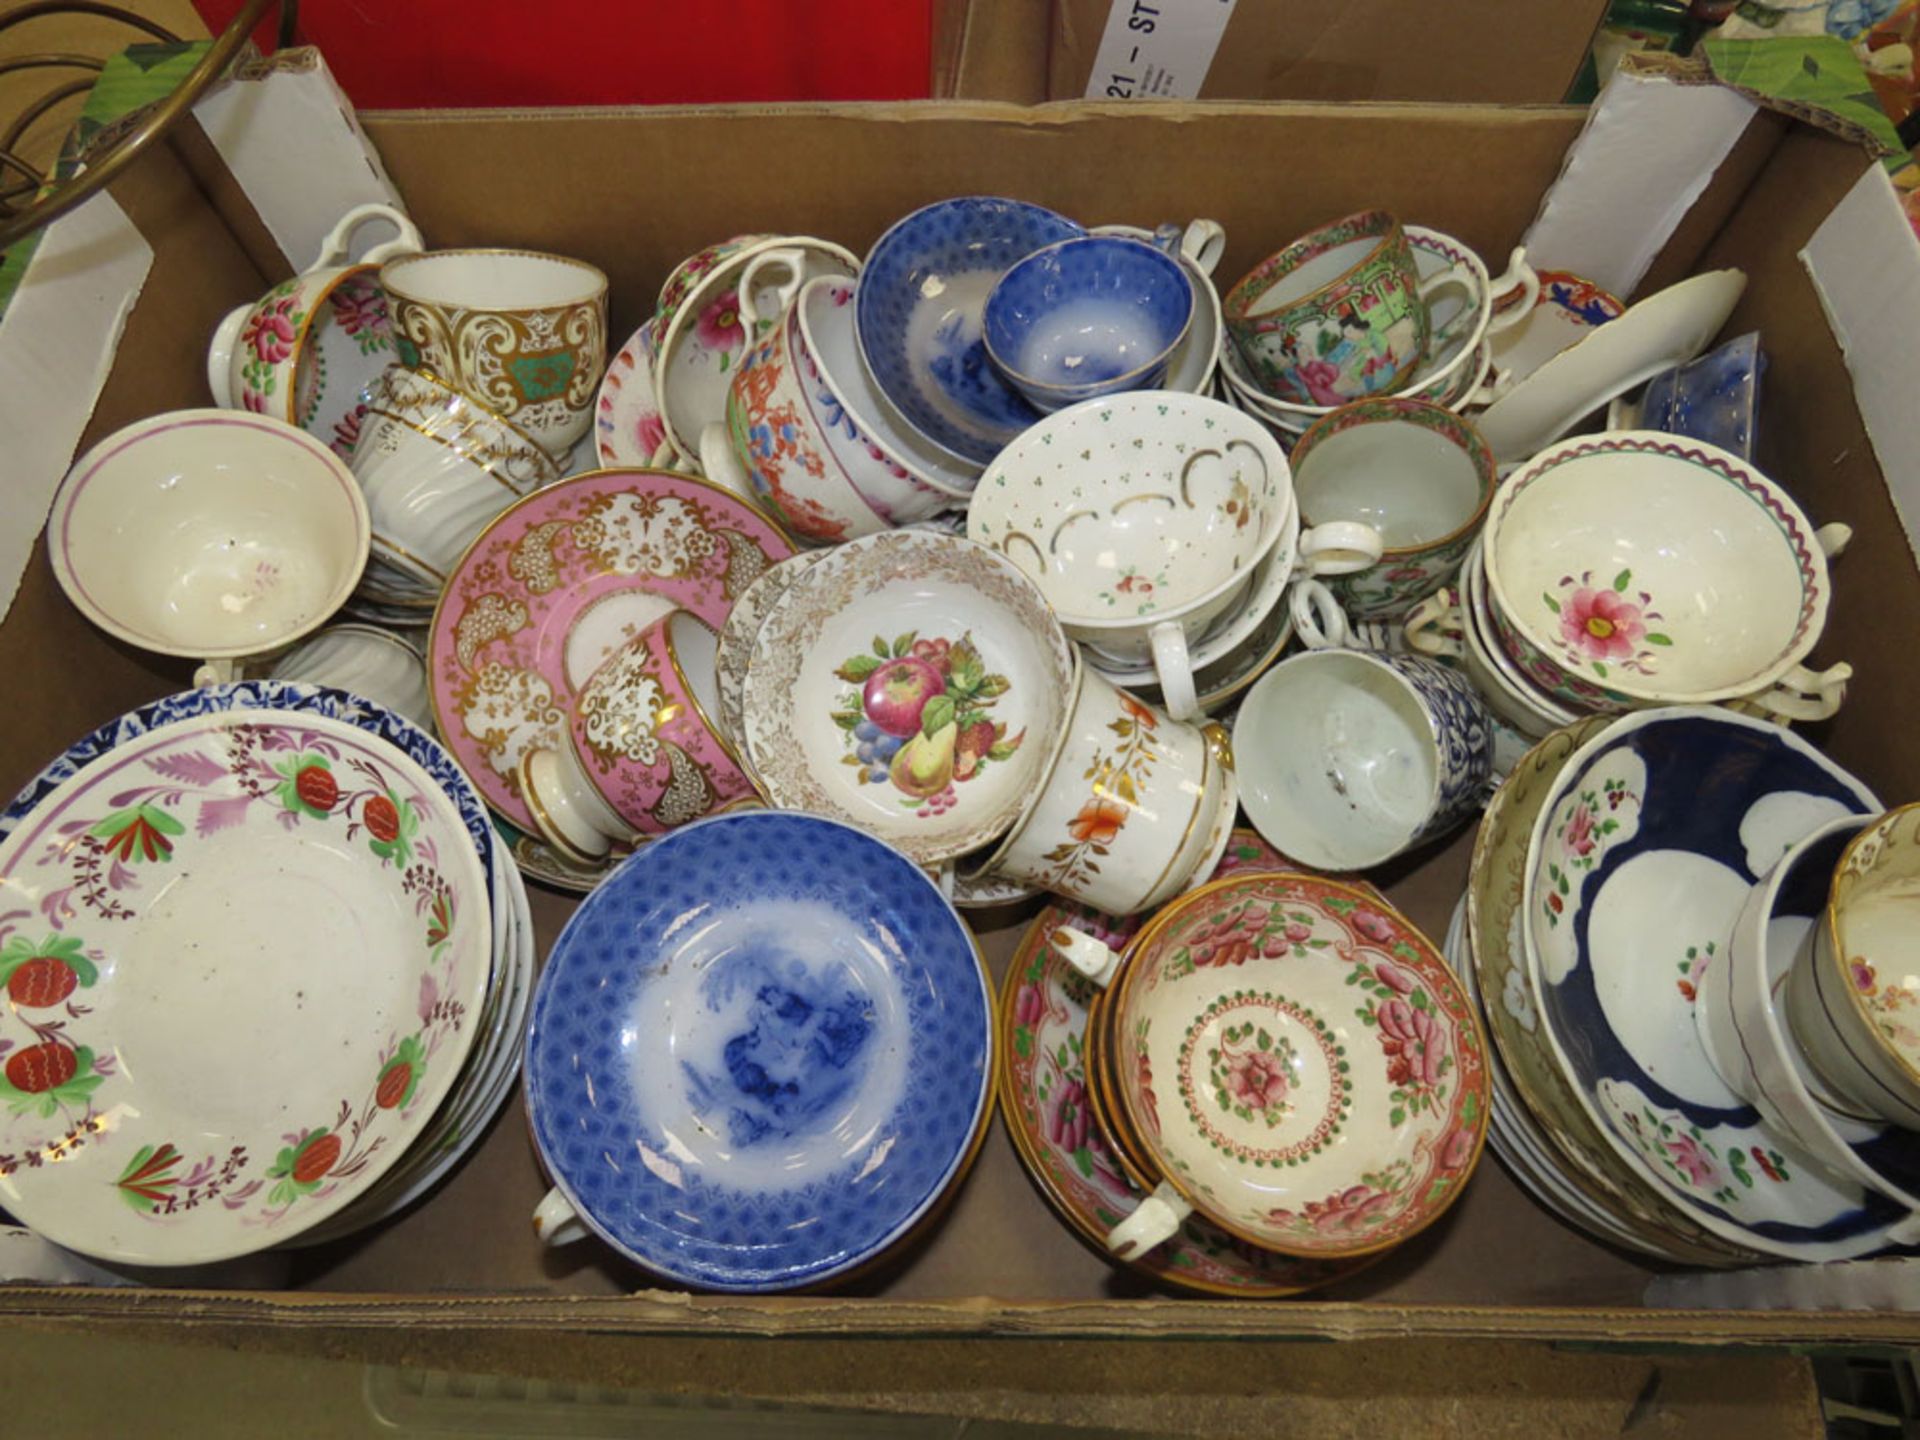 Box containing a large quantity of floral patterned cups and saucers